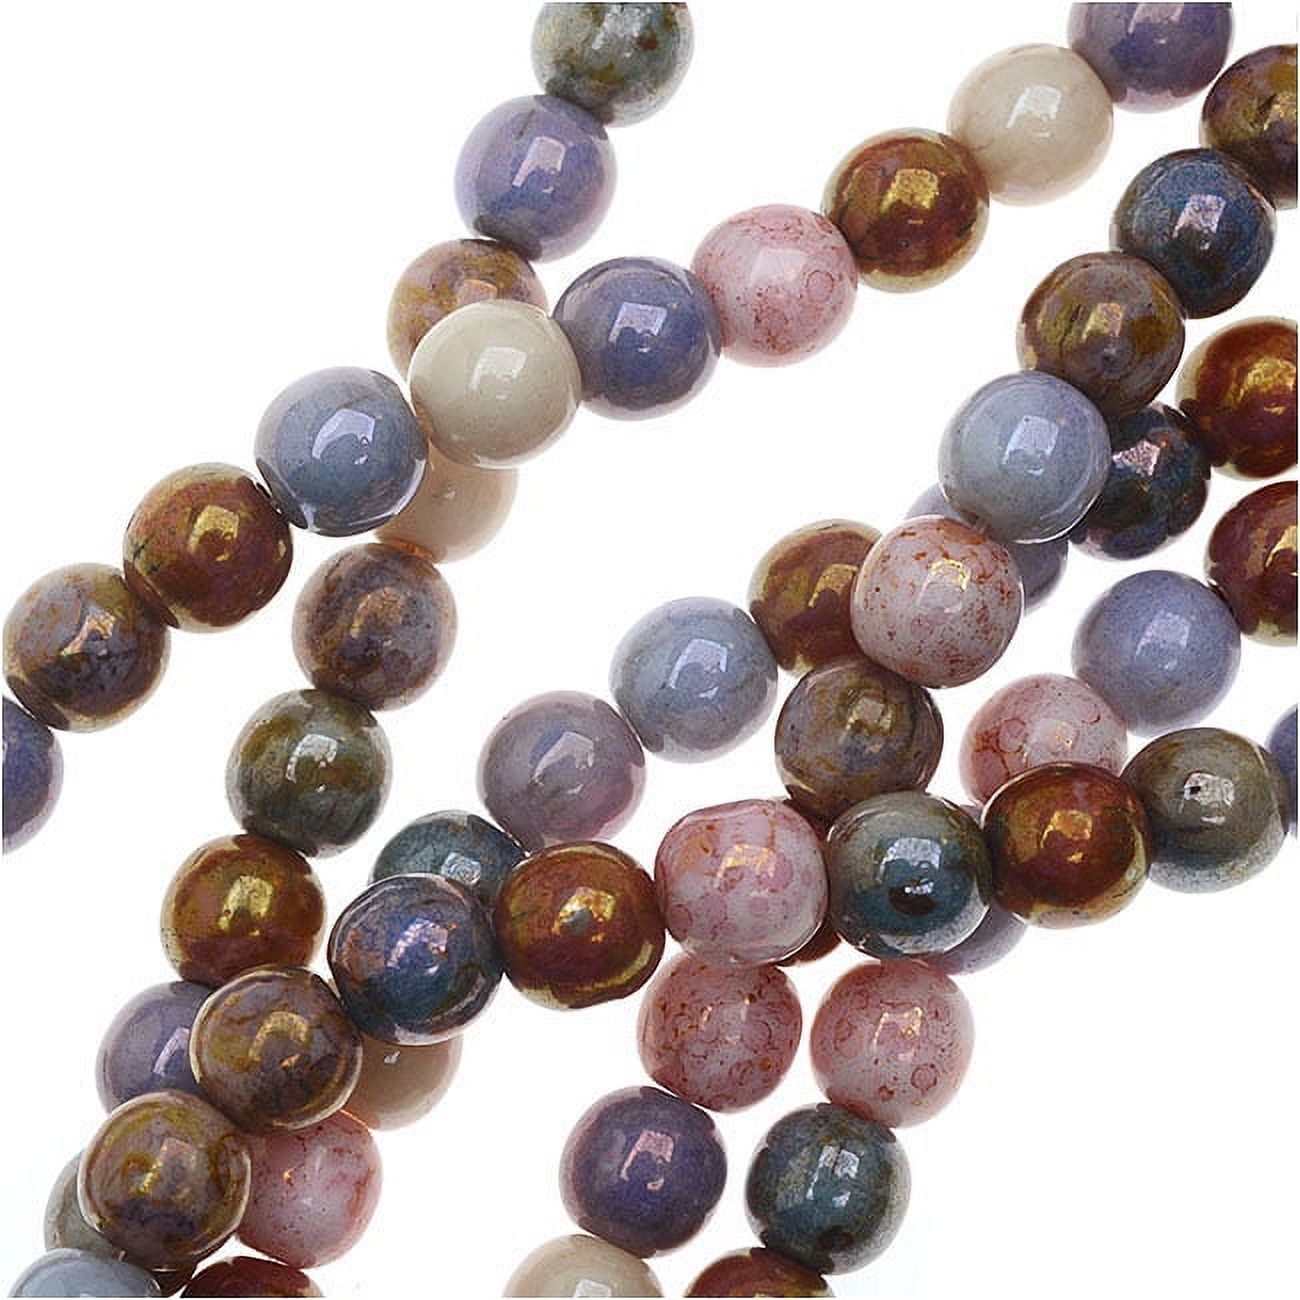 Czech Glass Beads, Round Druks 6mm, 1 Strand, Opaque Luster Mix - image 2 of 2